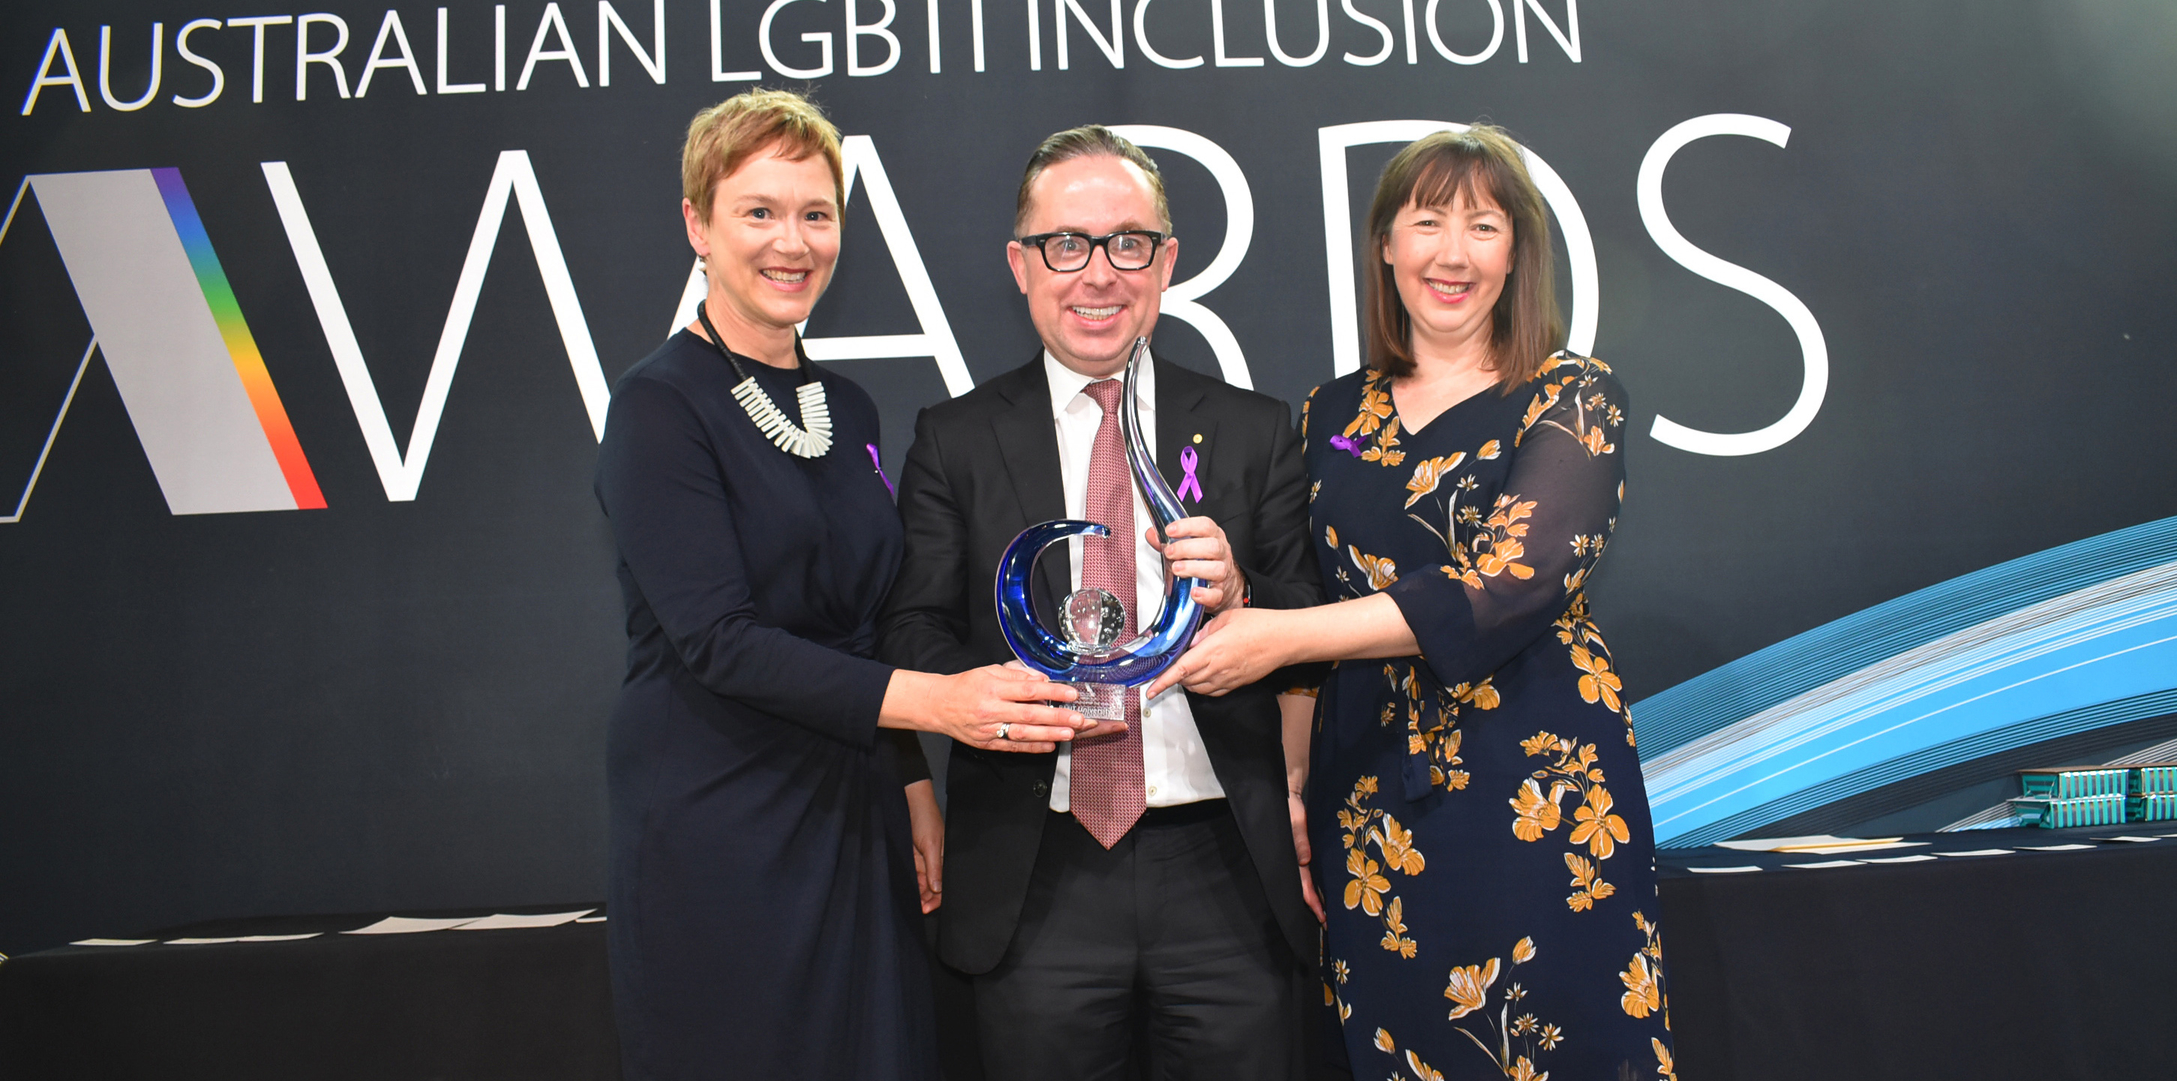 RMIT named ‘Employer of the Year’ for LGBTI inclusion